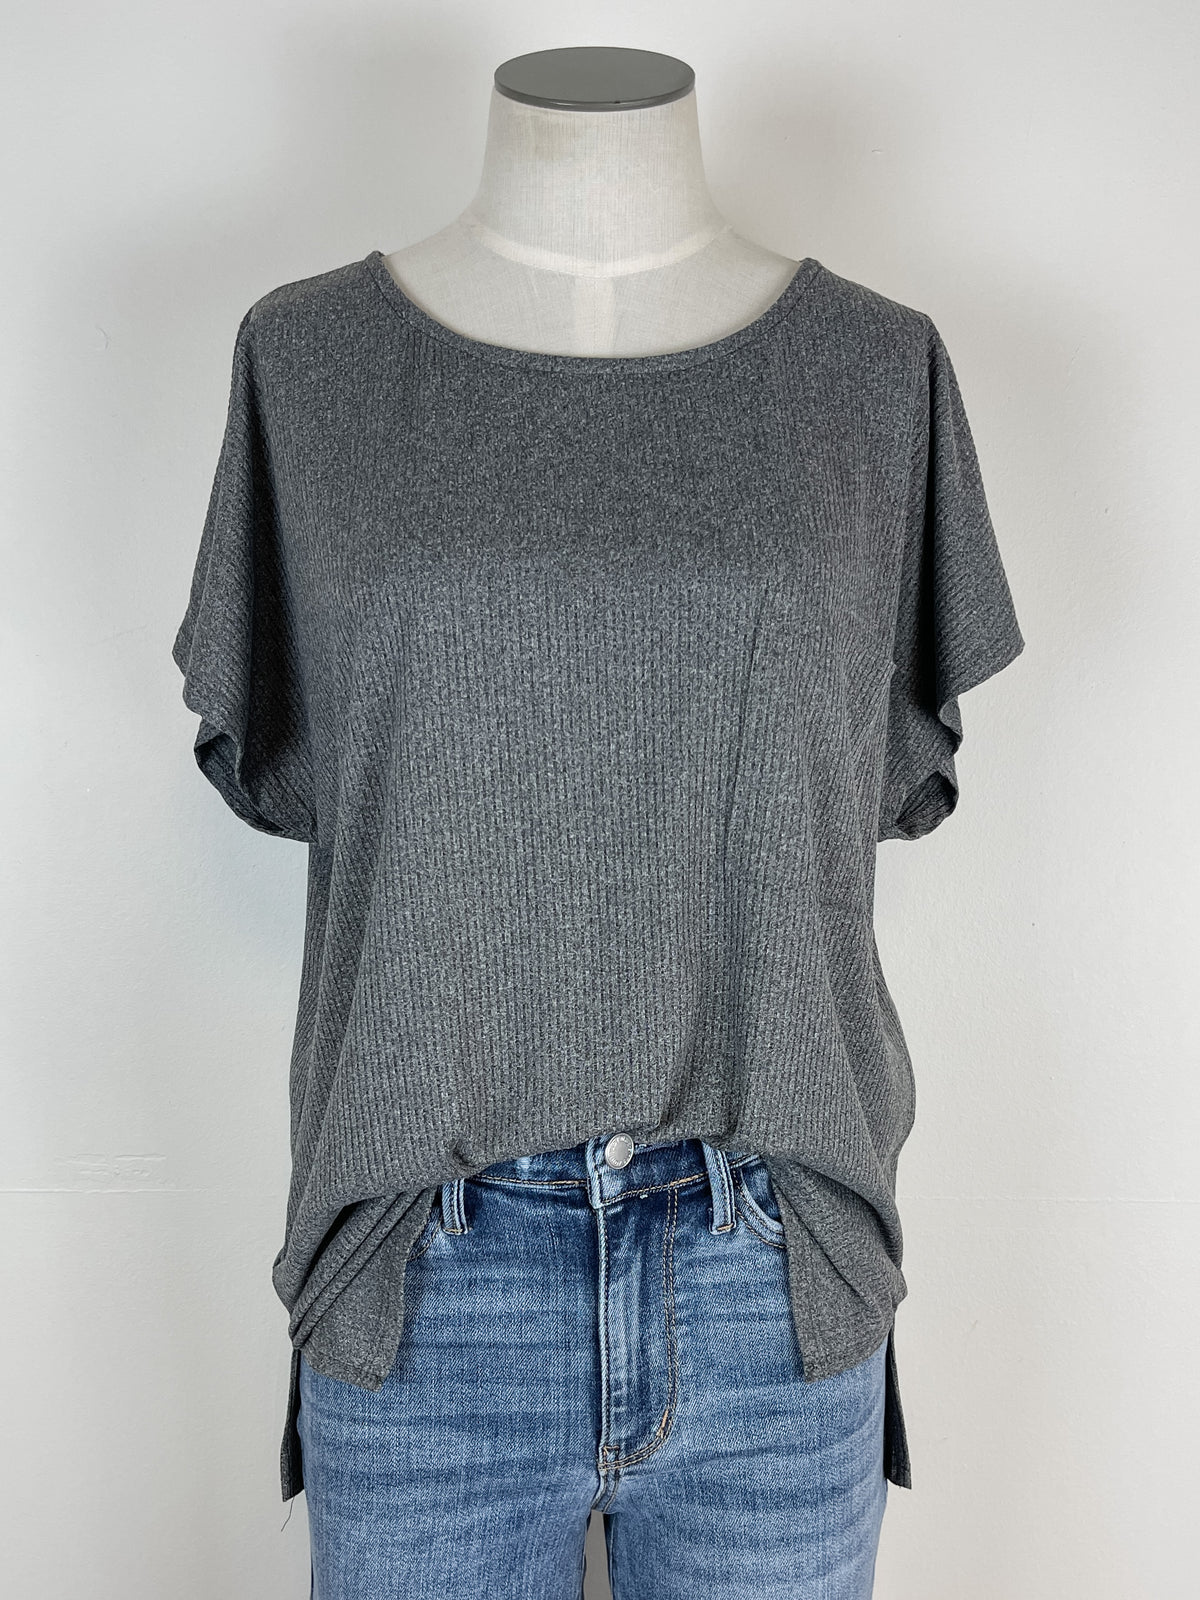 Waverly Ribbed Pocket Tee in Charcoal